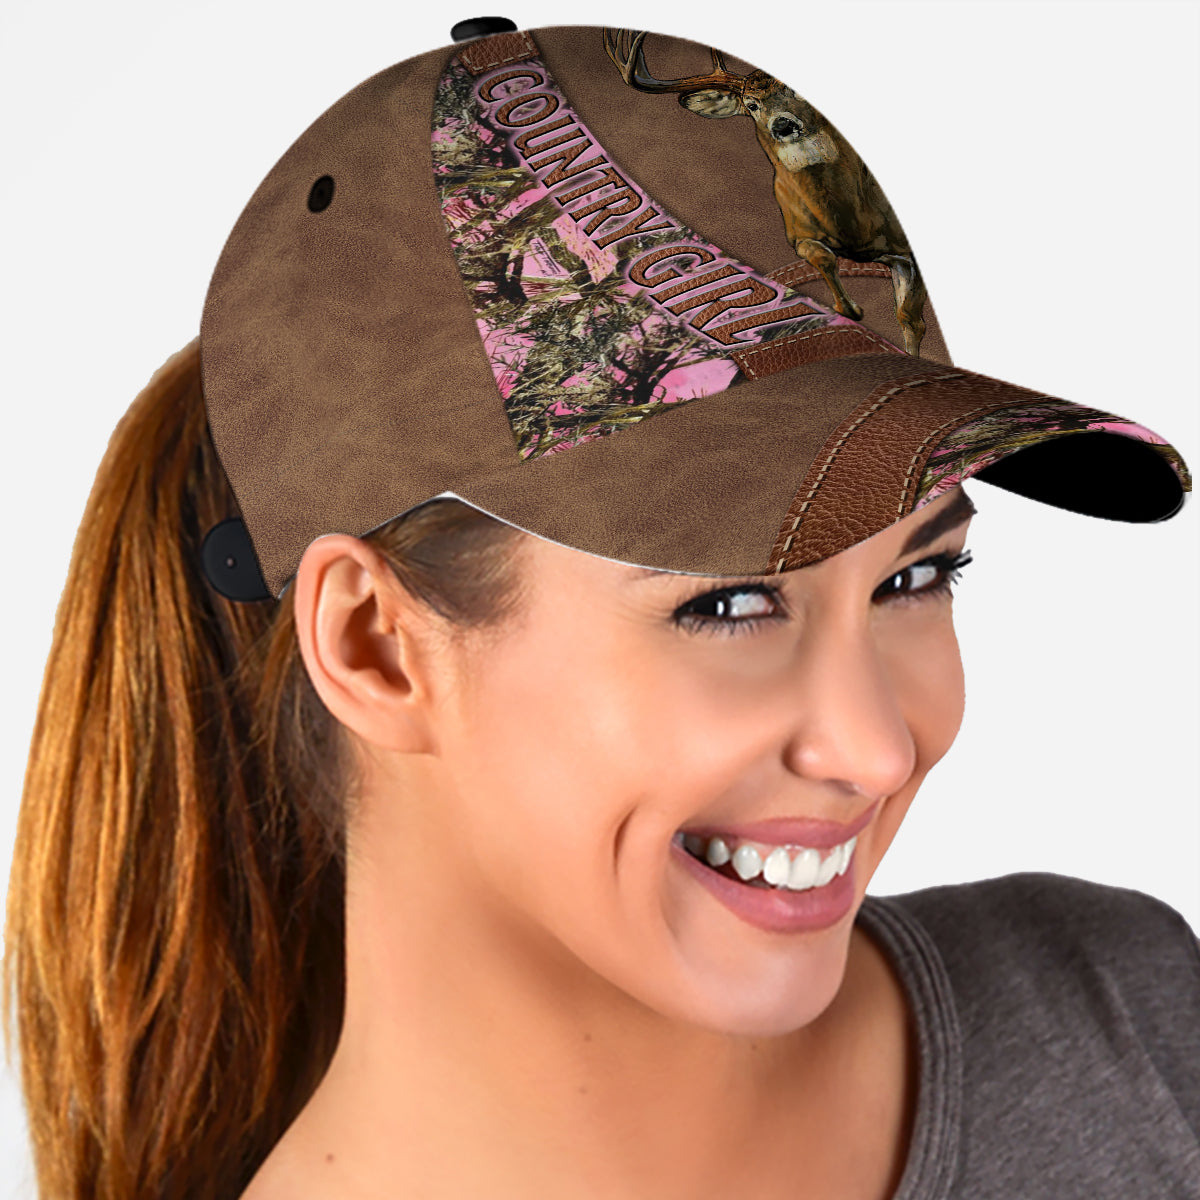 Love Hunting - Personalized Hunting Classic Cap